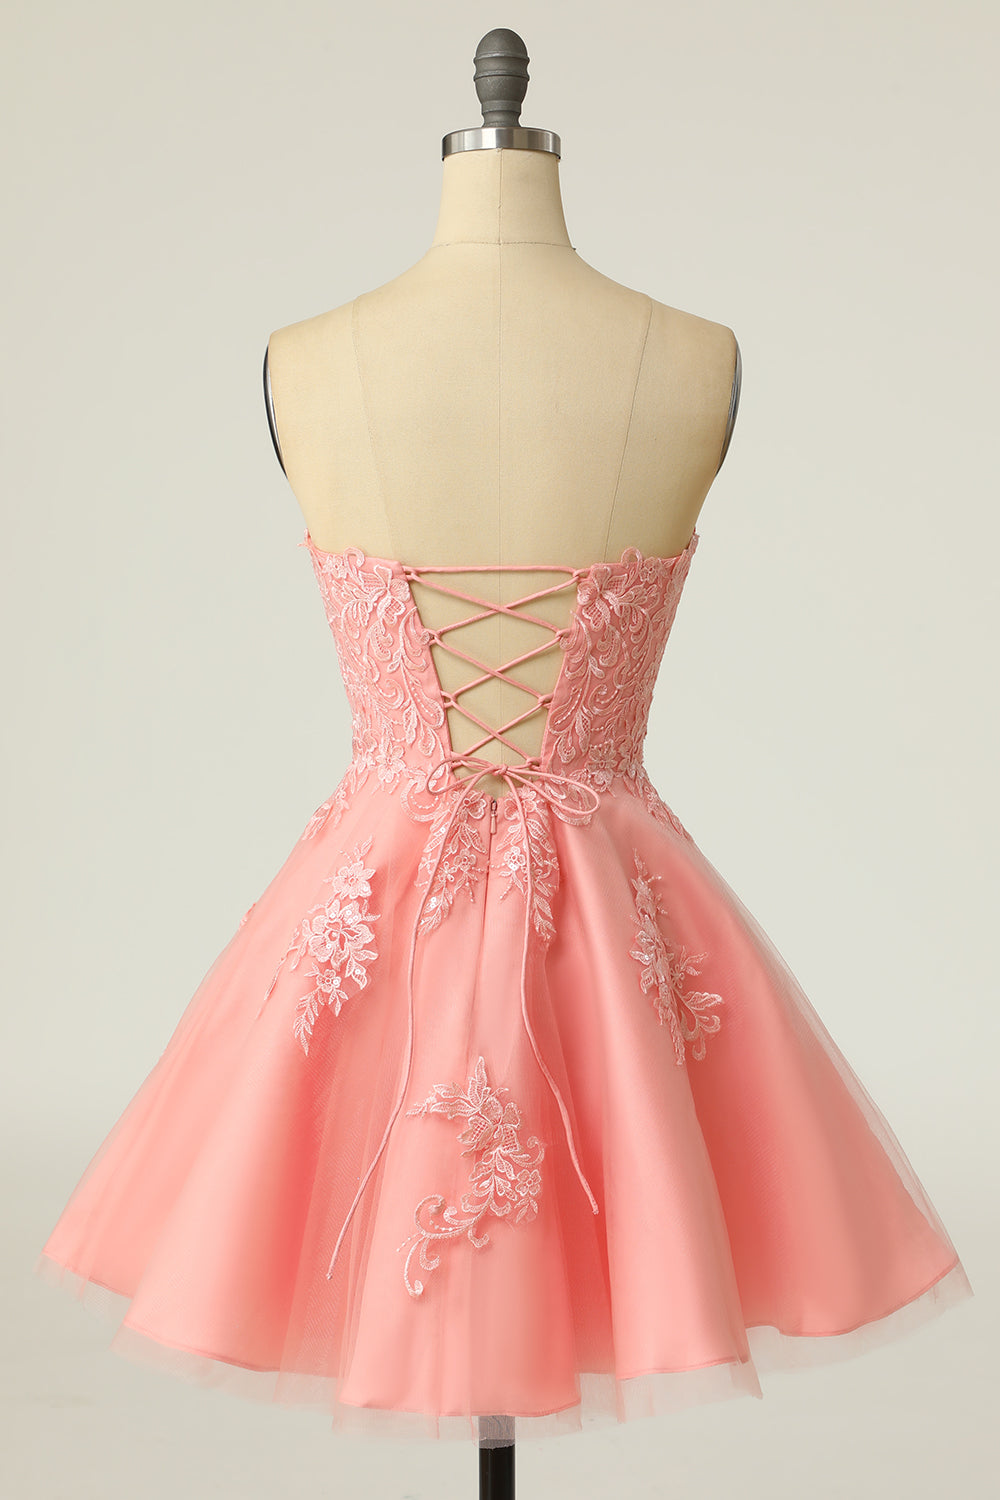 Pink Strapless Lace-Up A-Line Short Homecoming Dress with Floral Lace